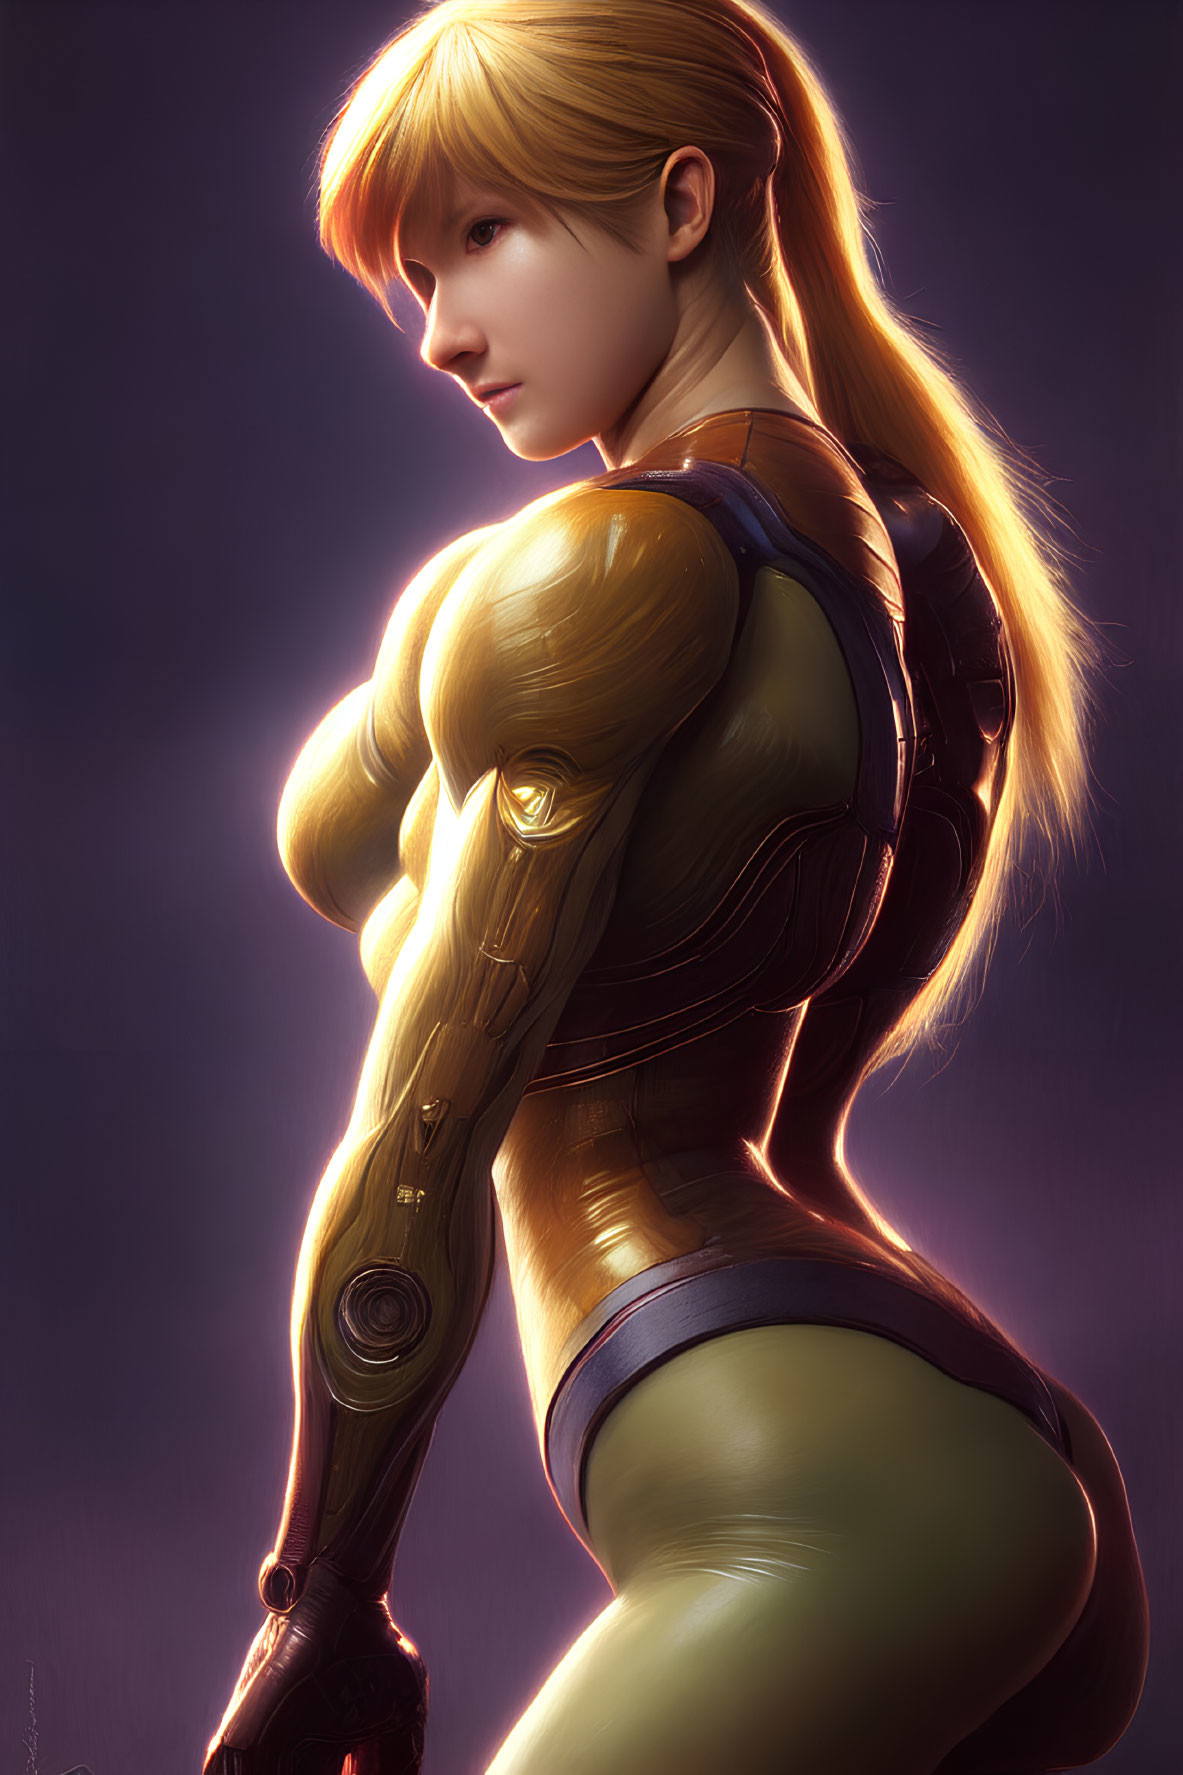 Blond-Haired Female Character in Futuristic Suit on Purple Background